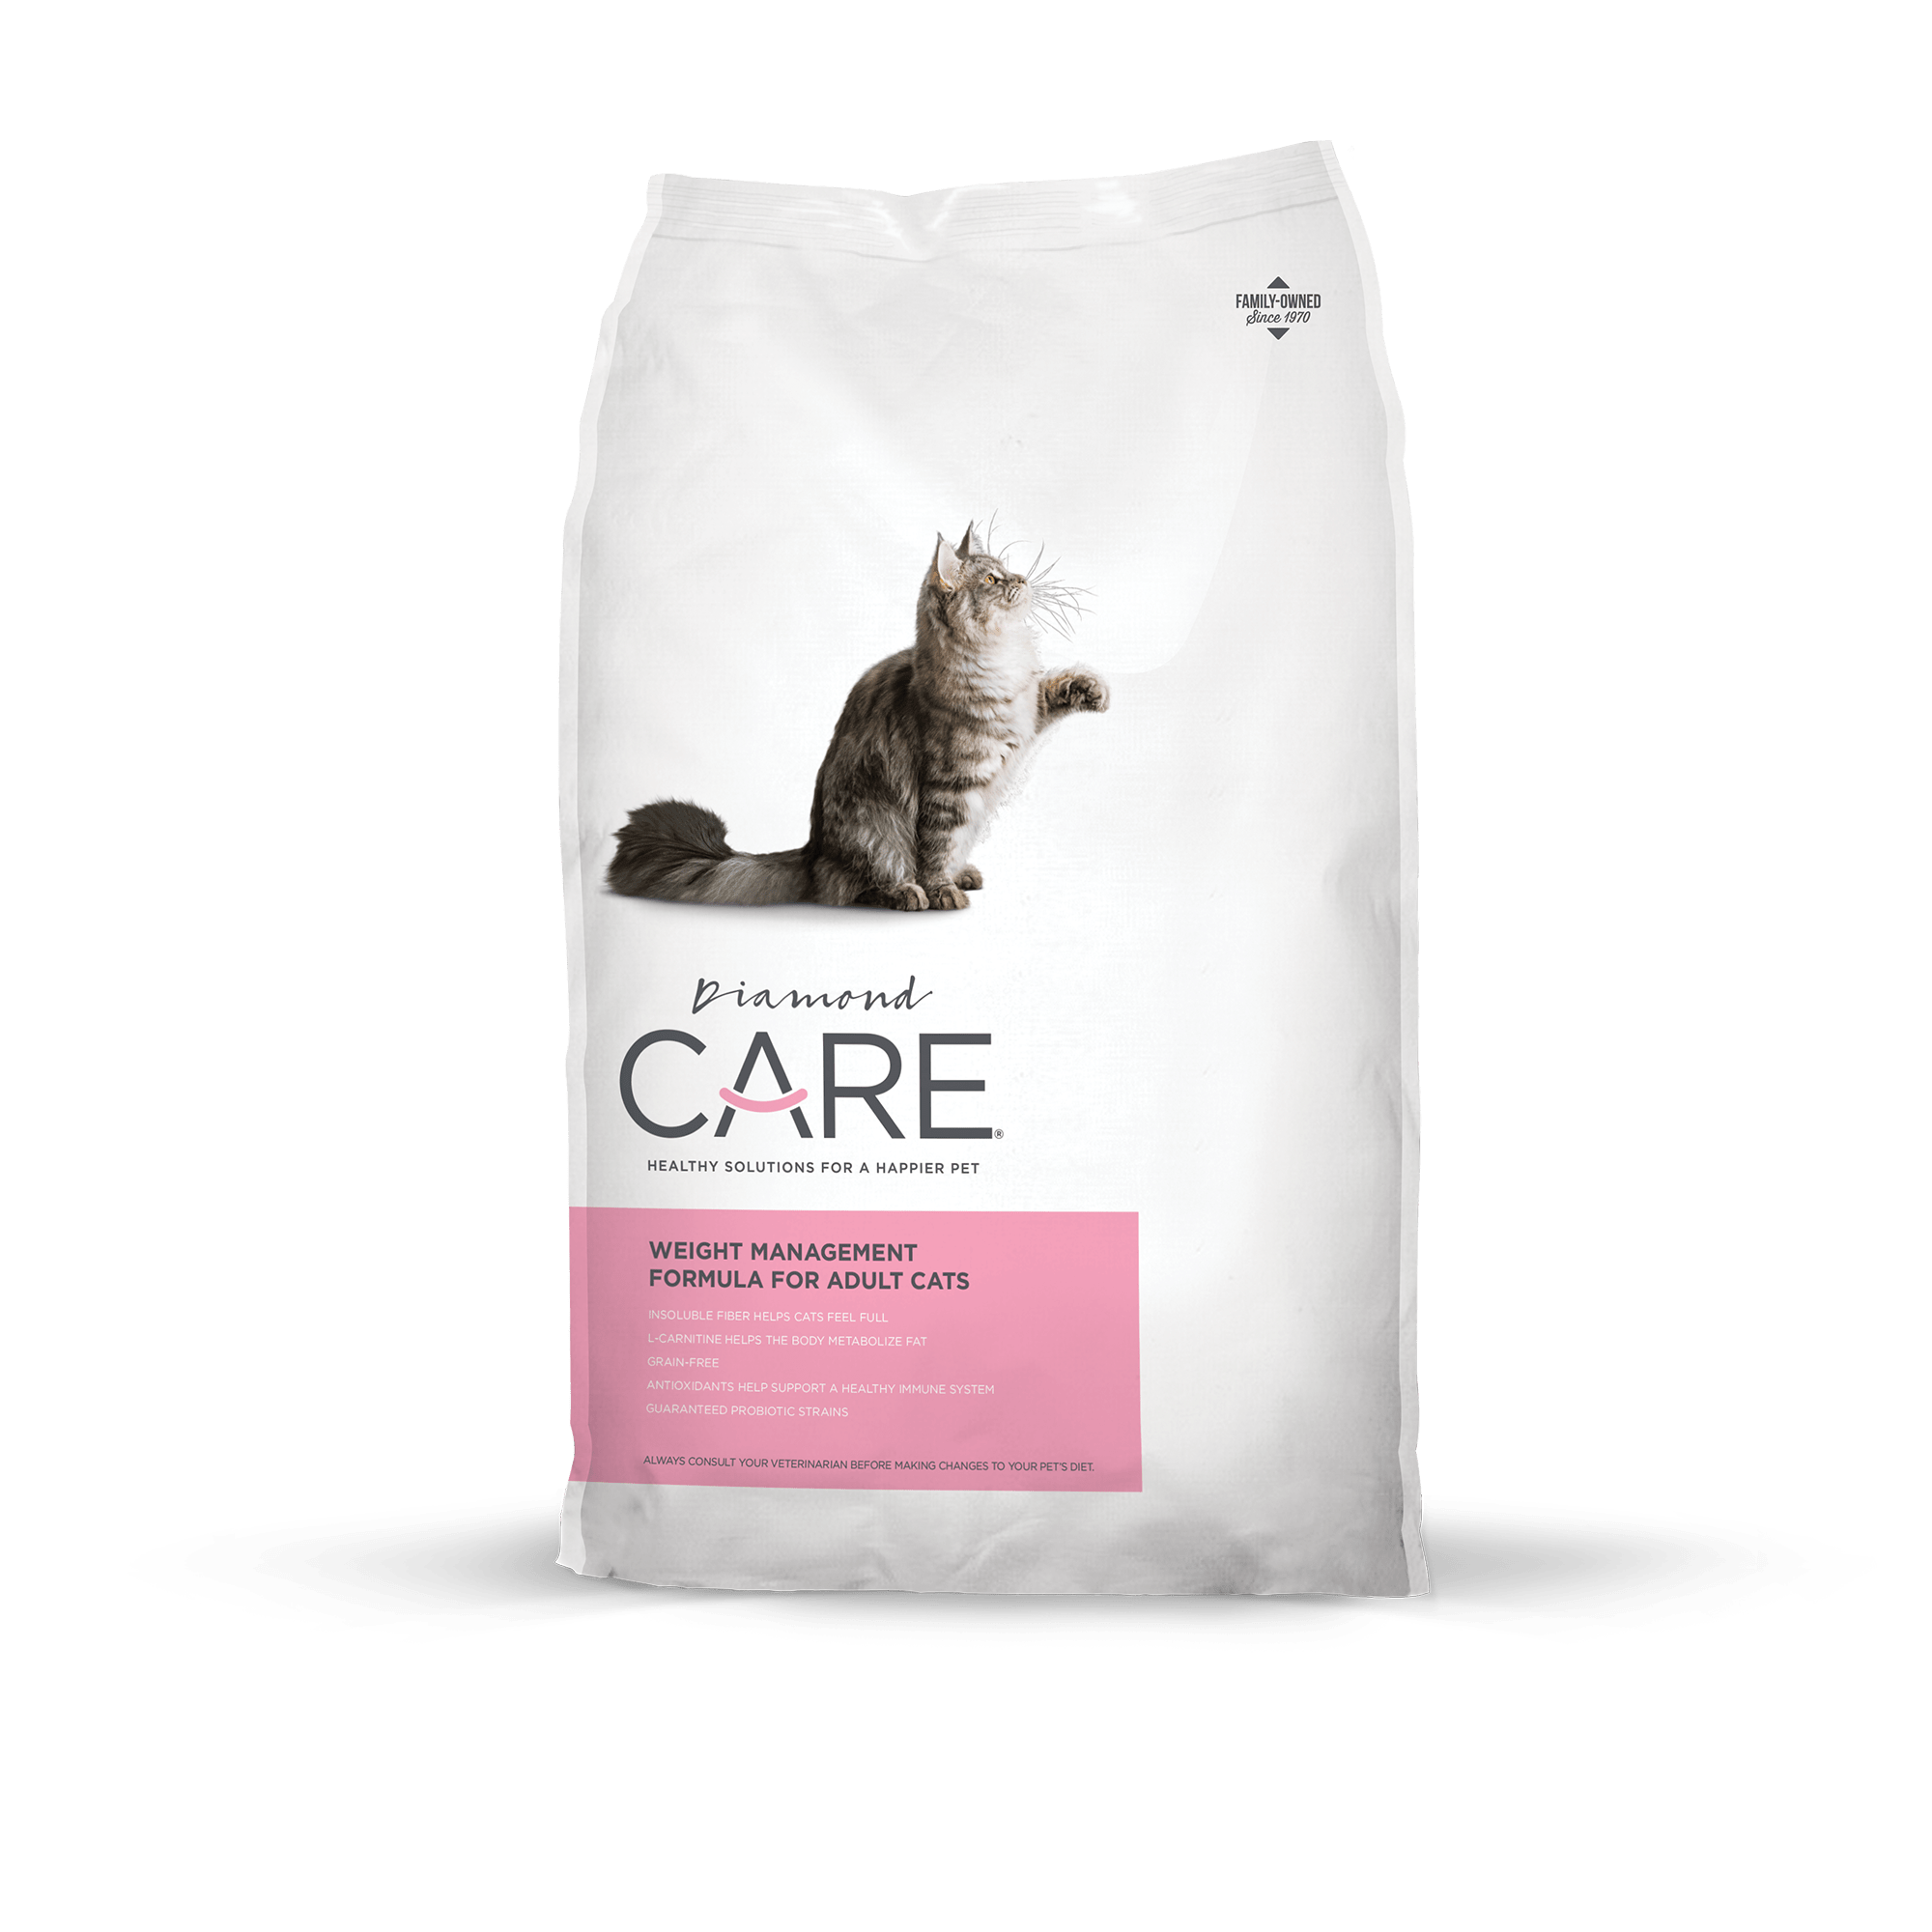 DIAMOND CARE Weight Management Formula for Adult Cats (6lbs/2.7kg)